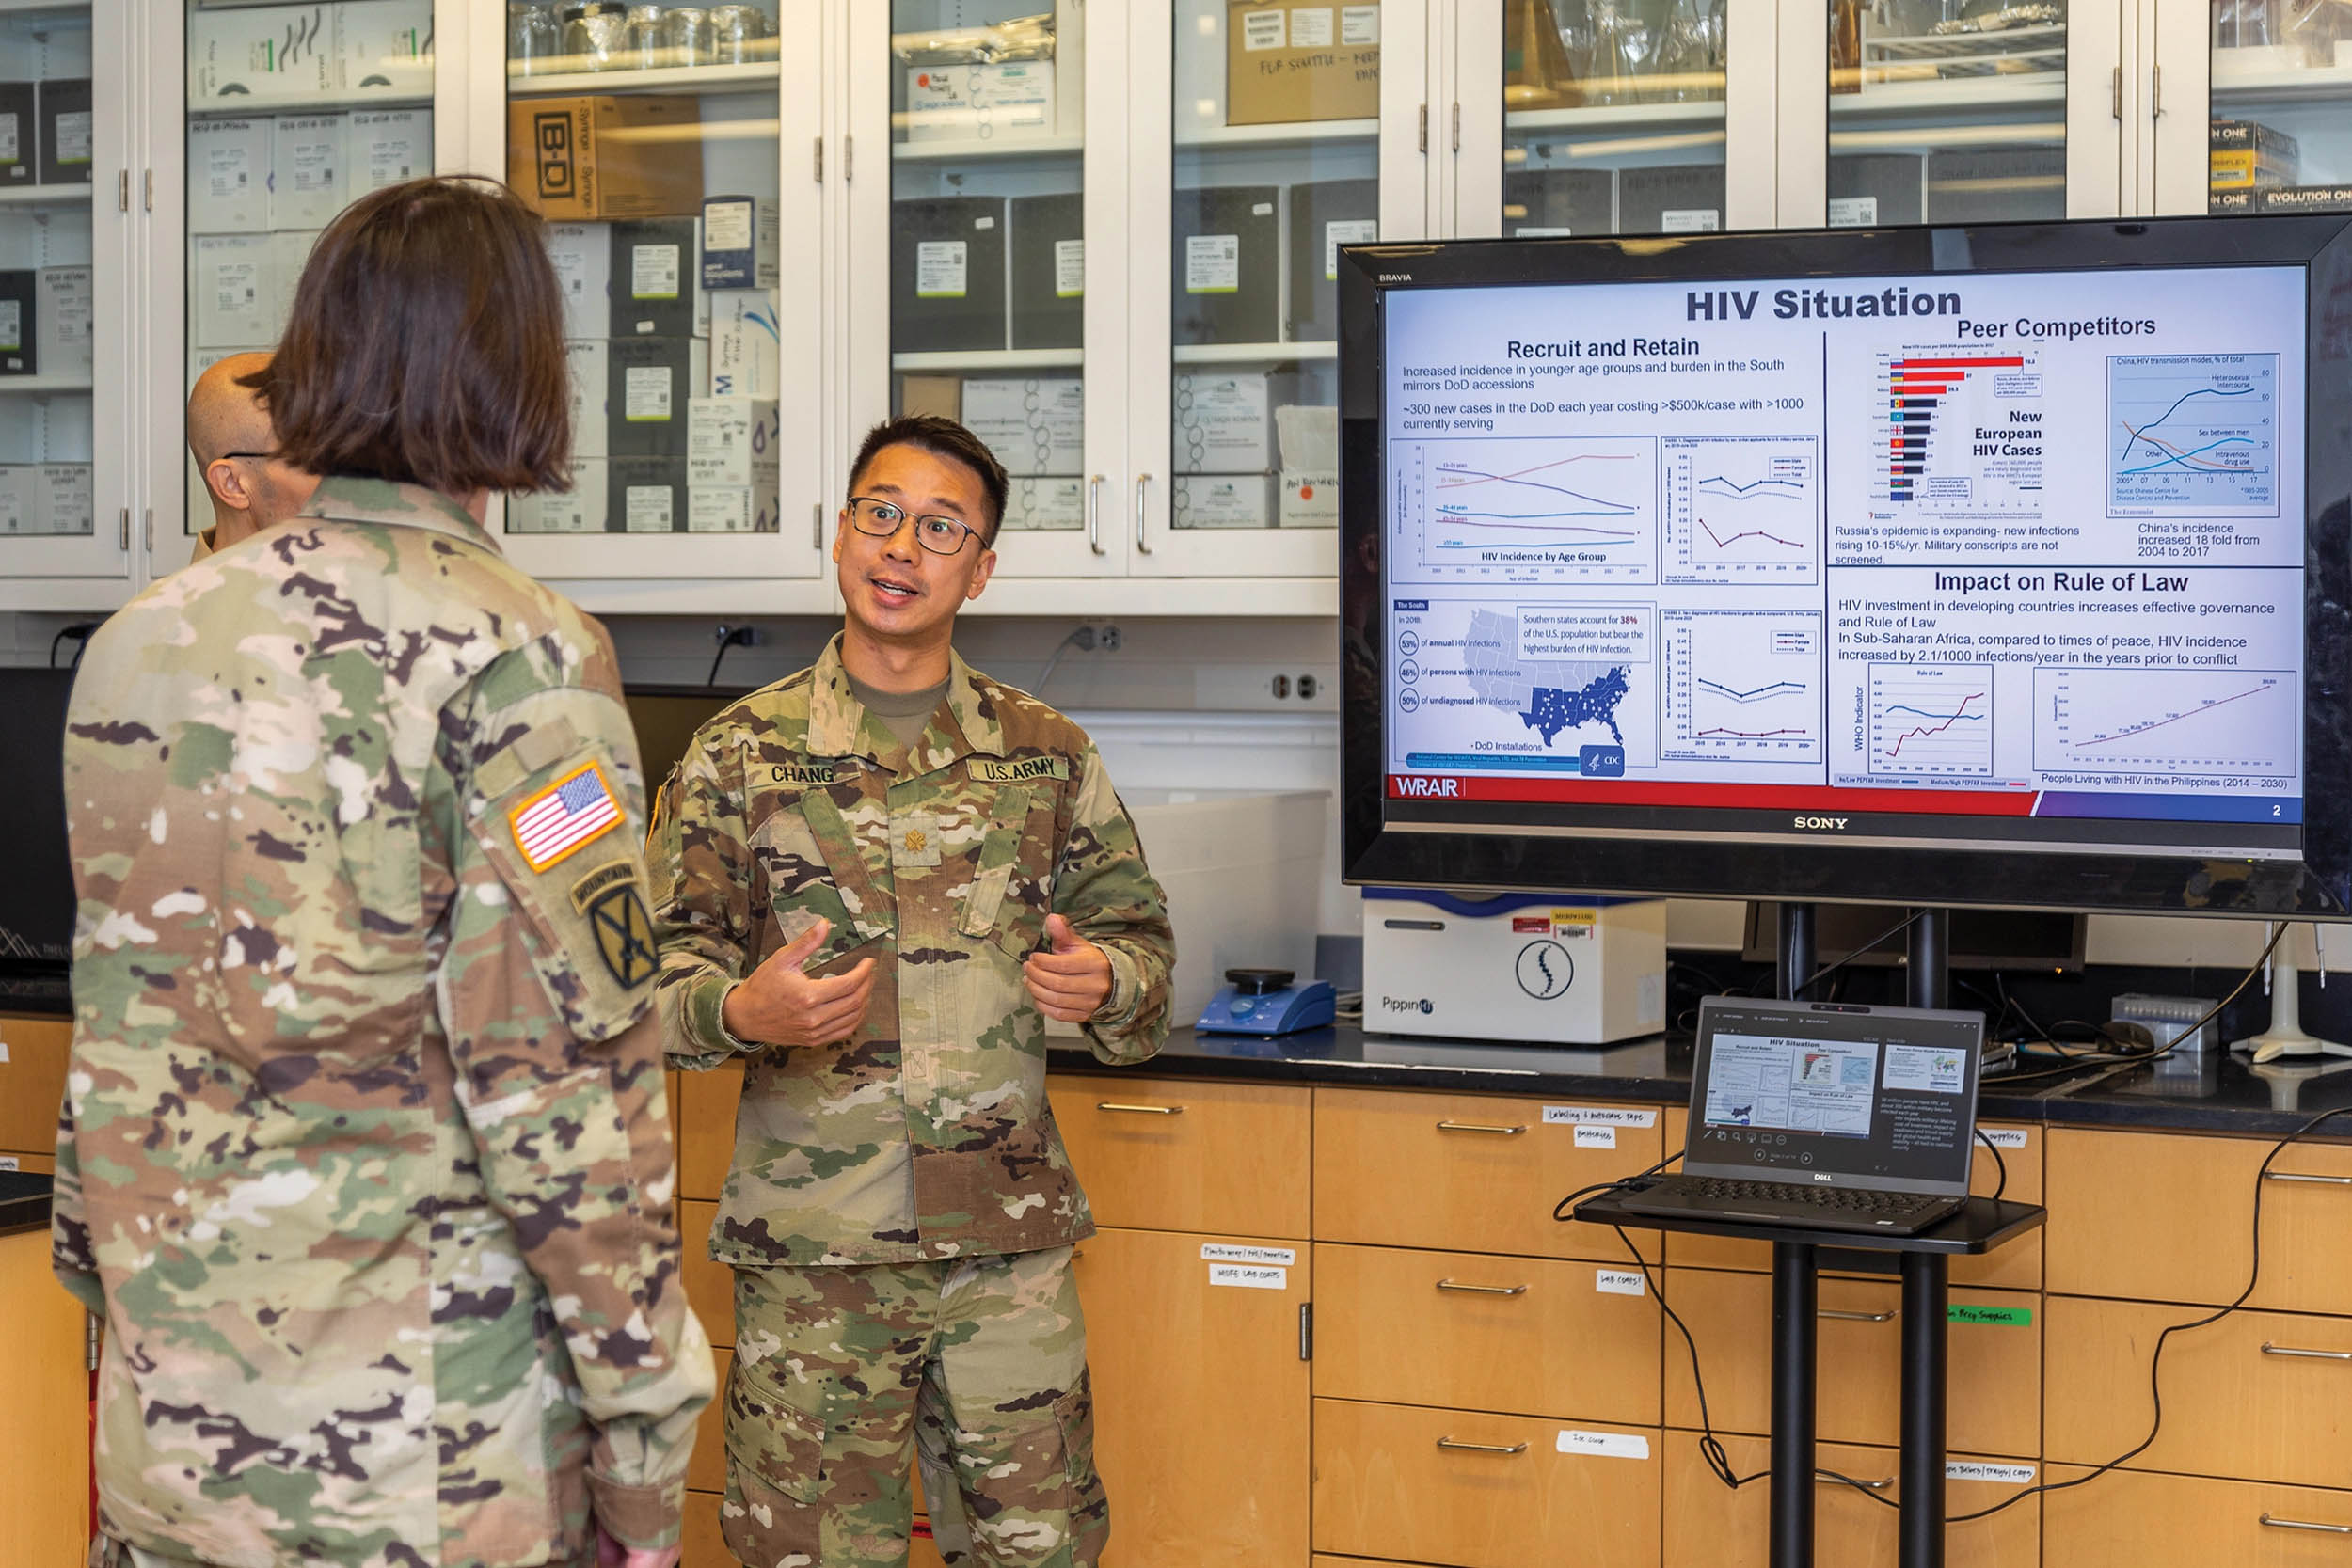 Major David Chang and Captain Sean Cavanaugh brief Brigadier General Wendy L. Harter on the HIV Research Program at Walter Reed Army Institute of Research, June 29, 2021 (U.S. Army/Arlen Caplan)